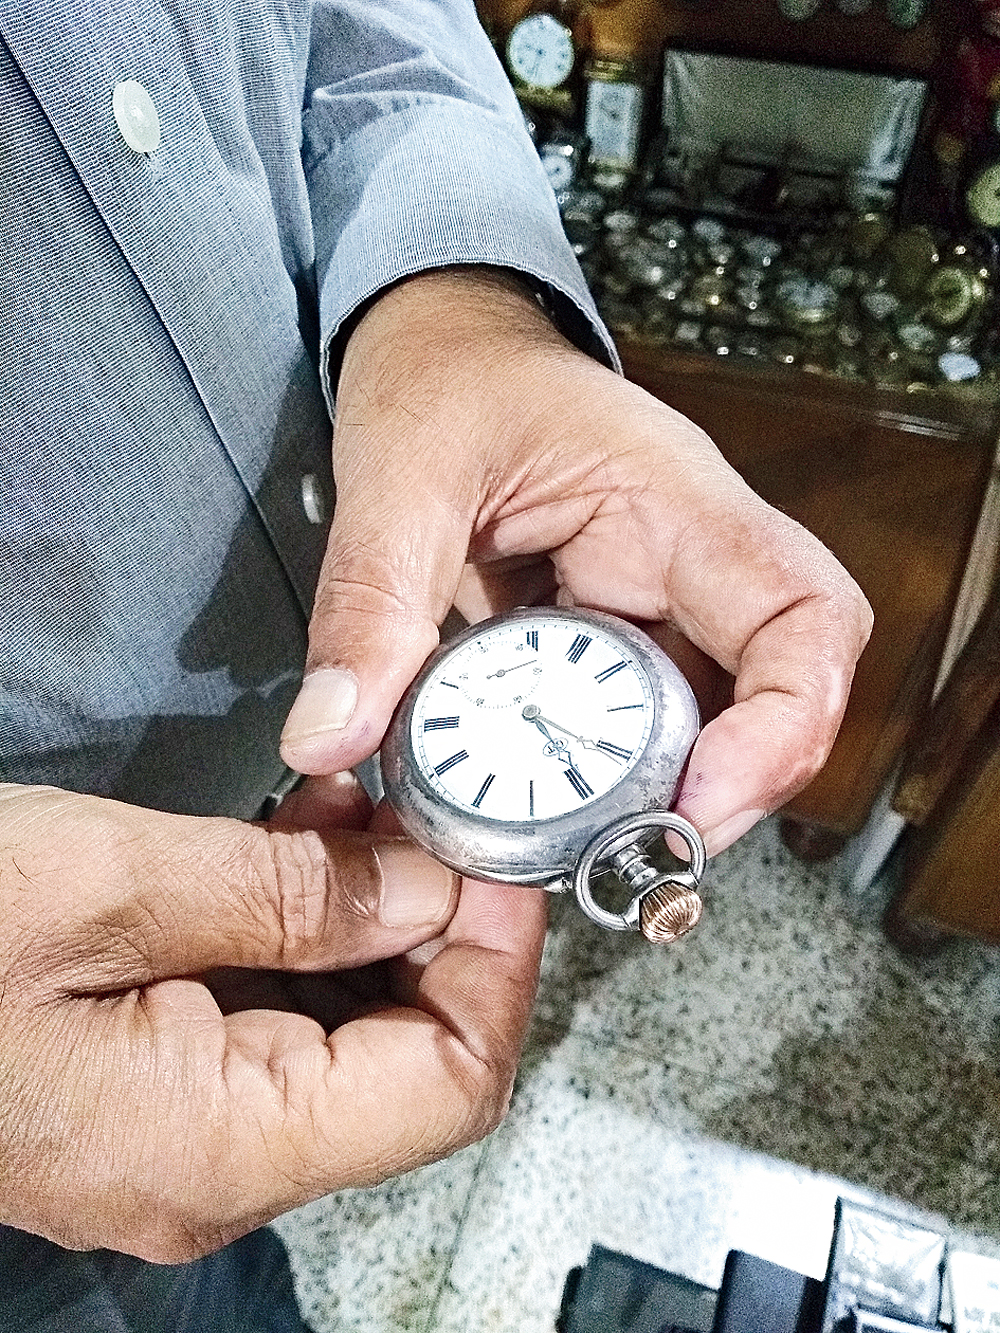 A silver pocket watch that once belonged to the Cooch Behar royal family